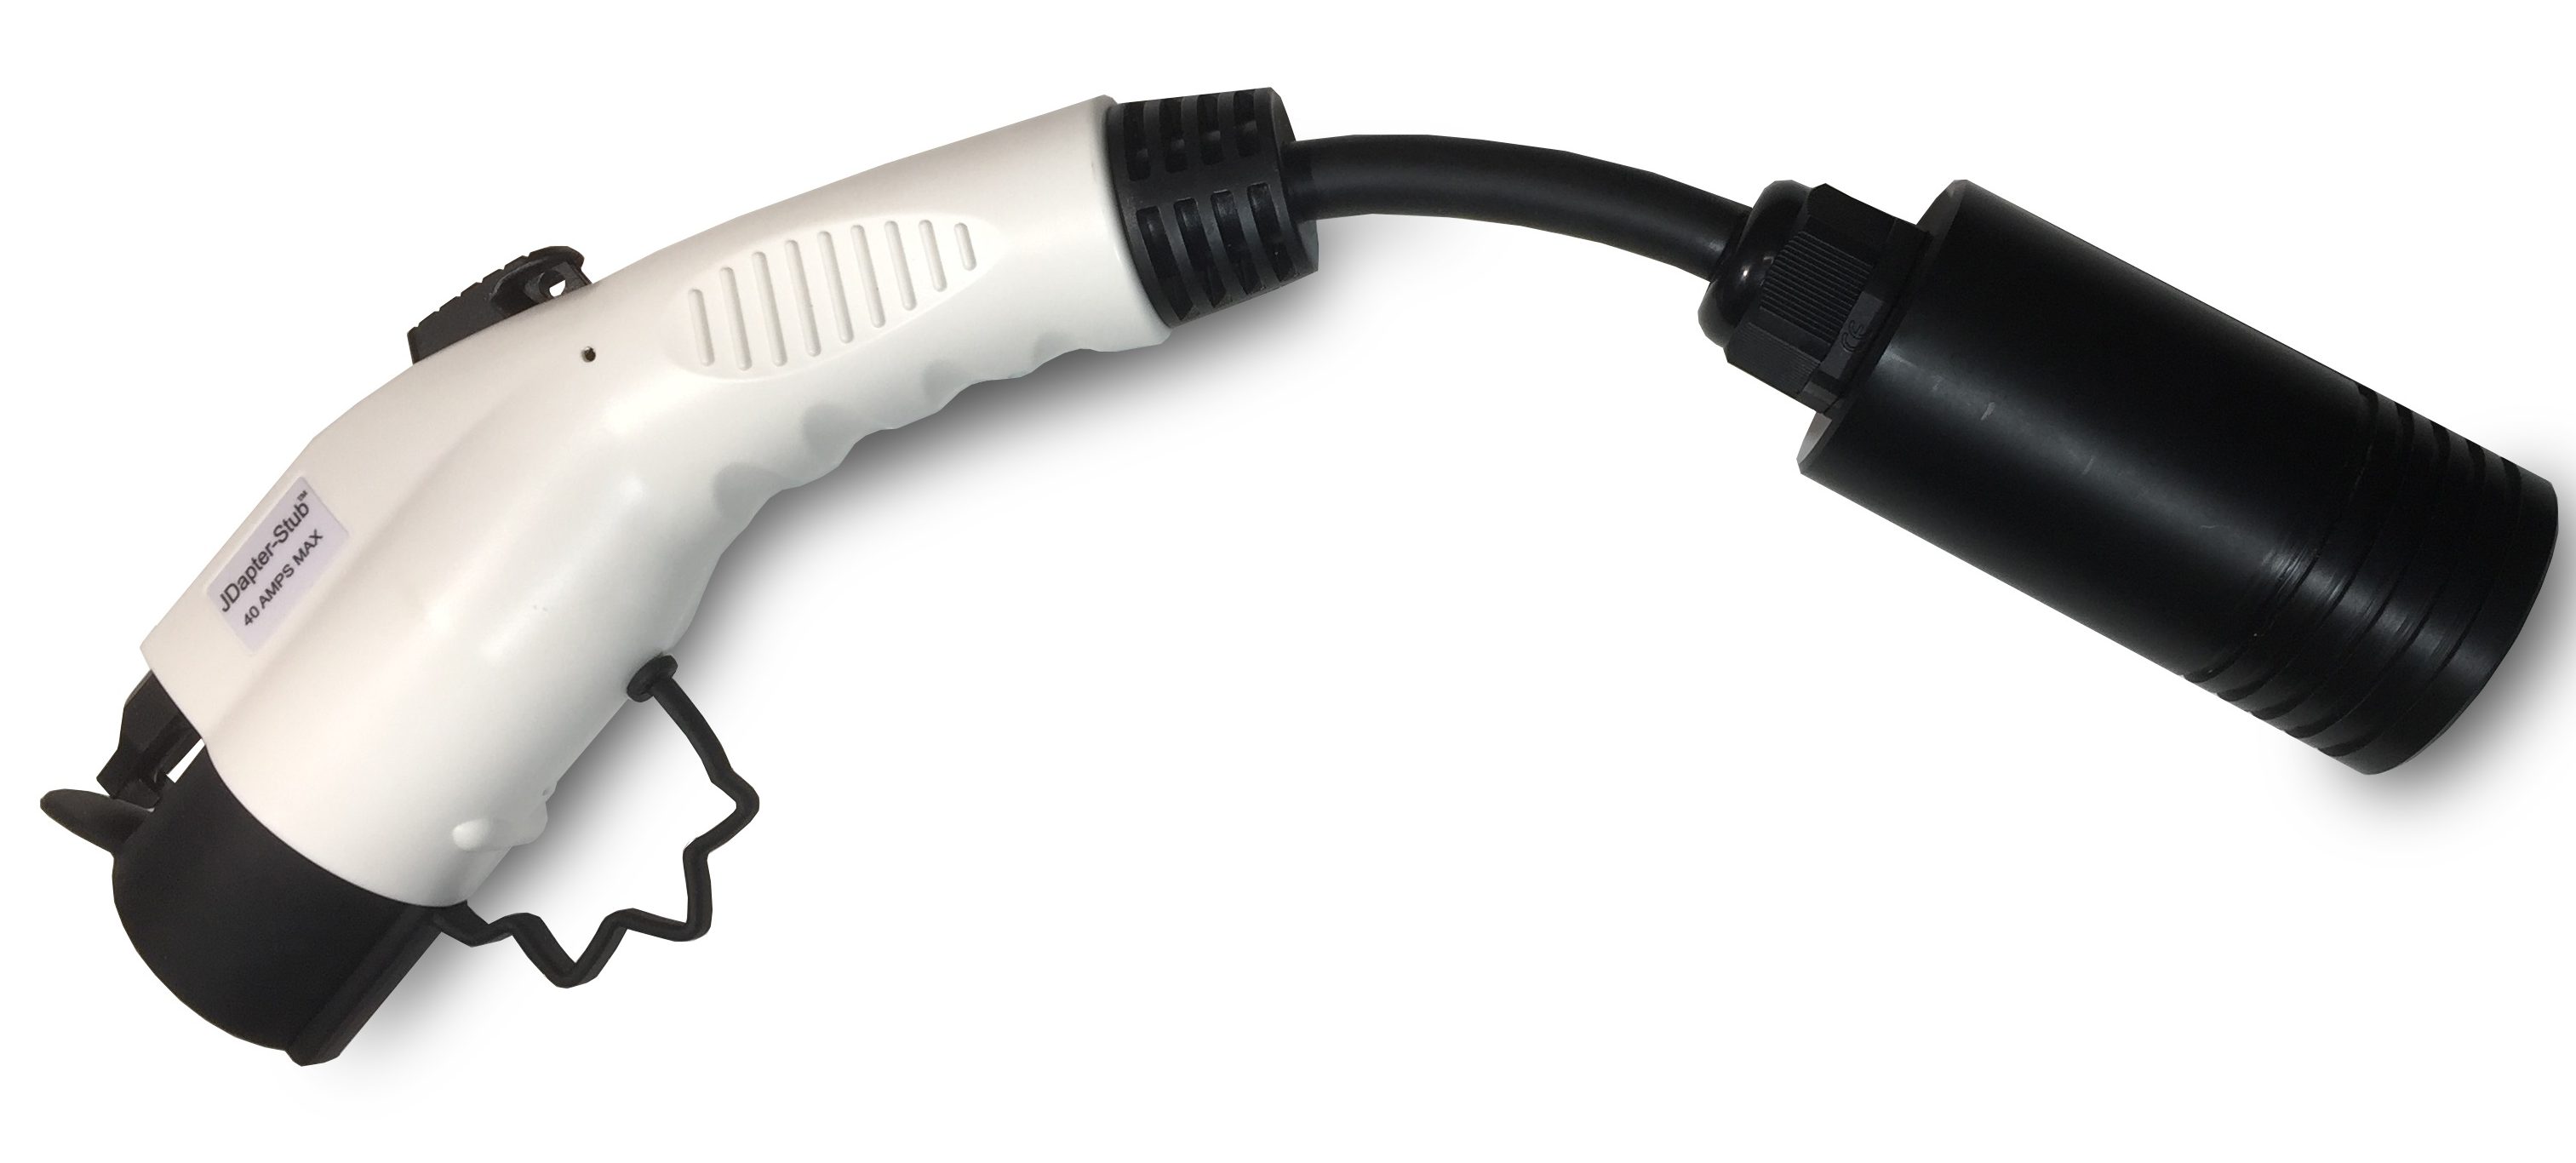 New Tesla To J1772 Adapter Allows Other Electric Cars To